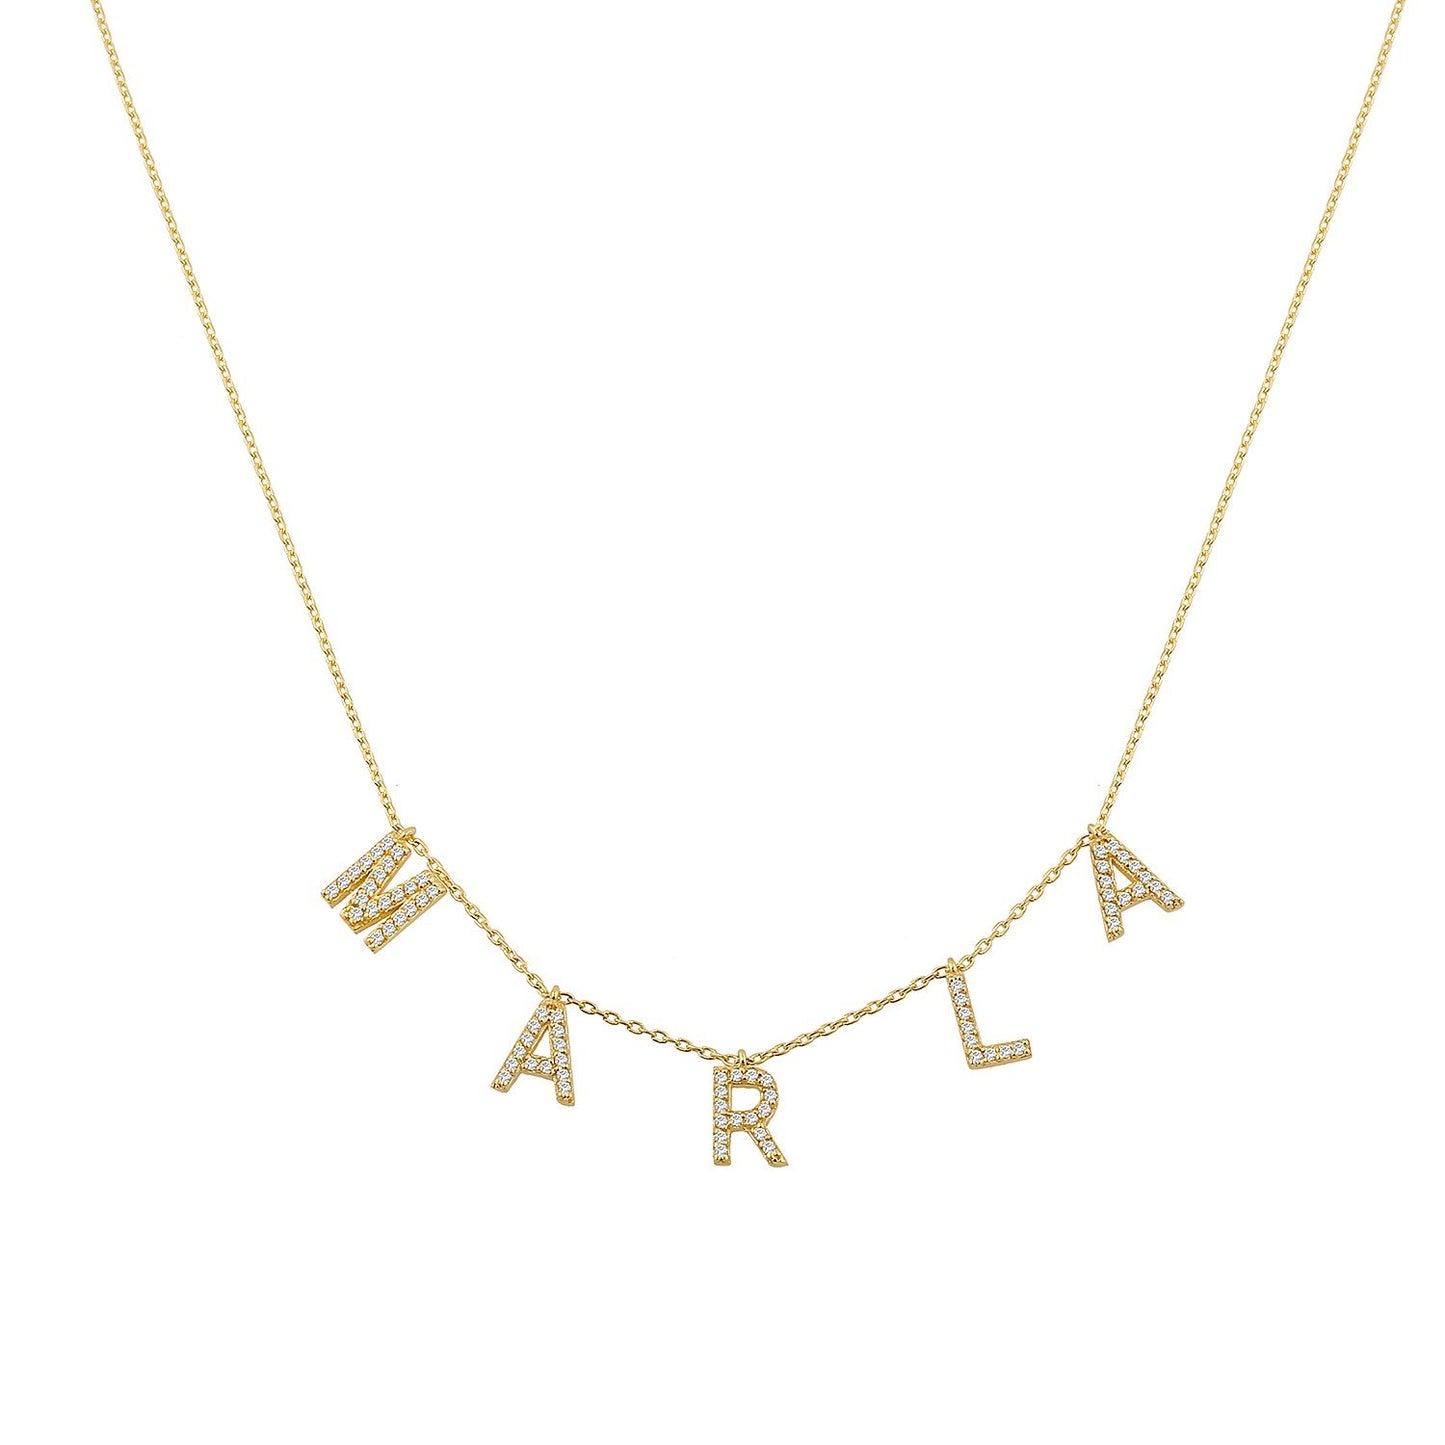 TSK It's All in a Name™ Necklace in 14k Gold with Diamonds JEWELRY The Sis Kiss One Letter 14k Gold with Diamonds